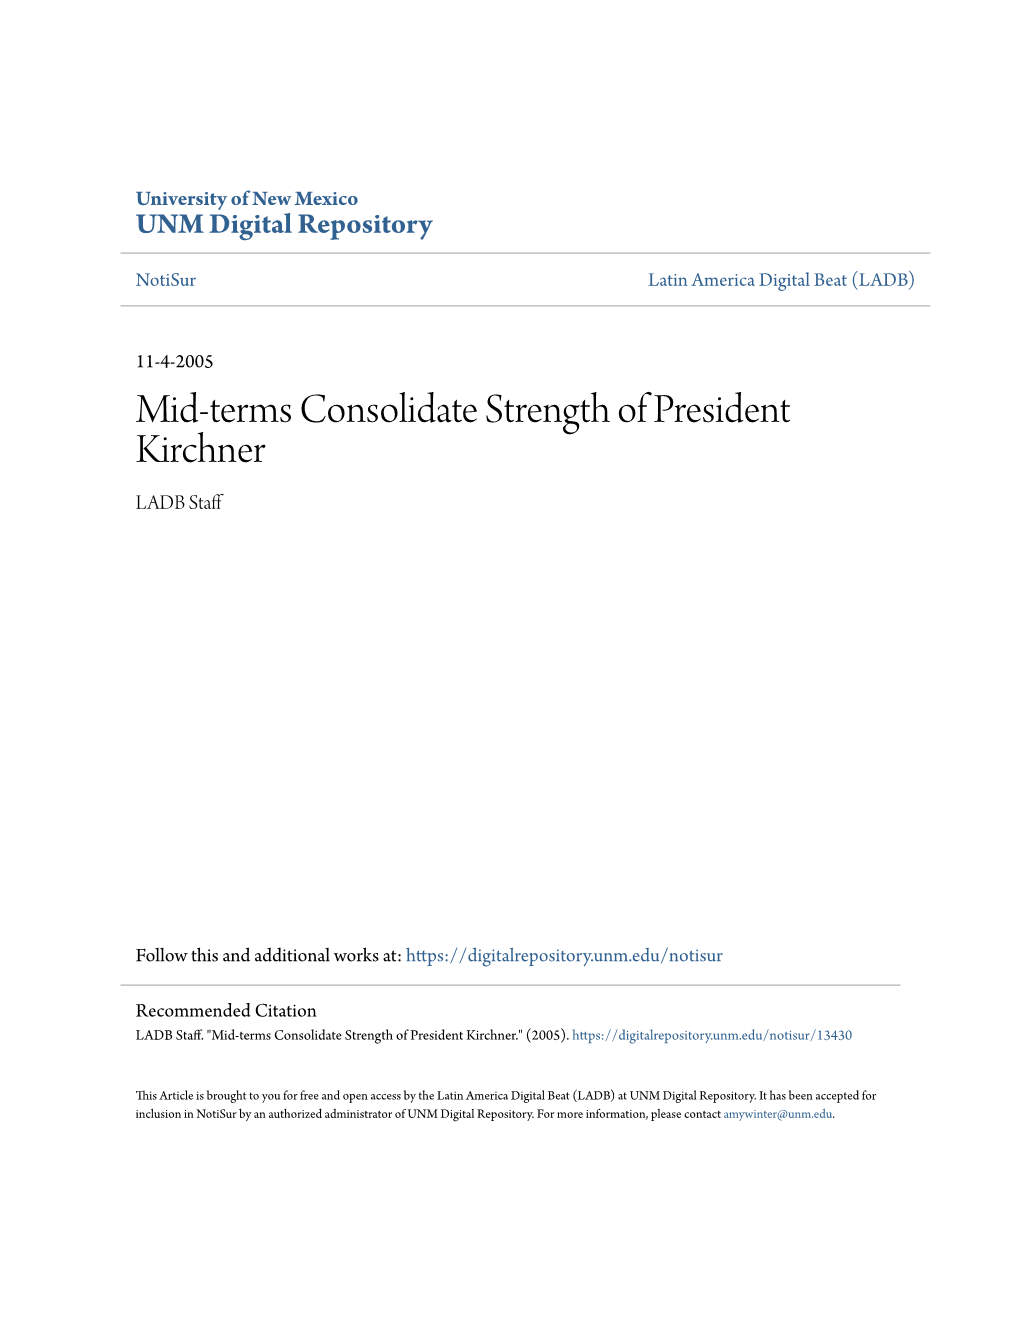 Mid-Terms Consolidate Strength of President Kirchner LADB Staff